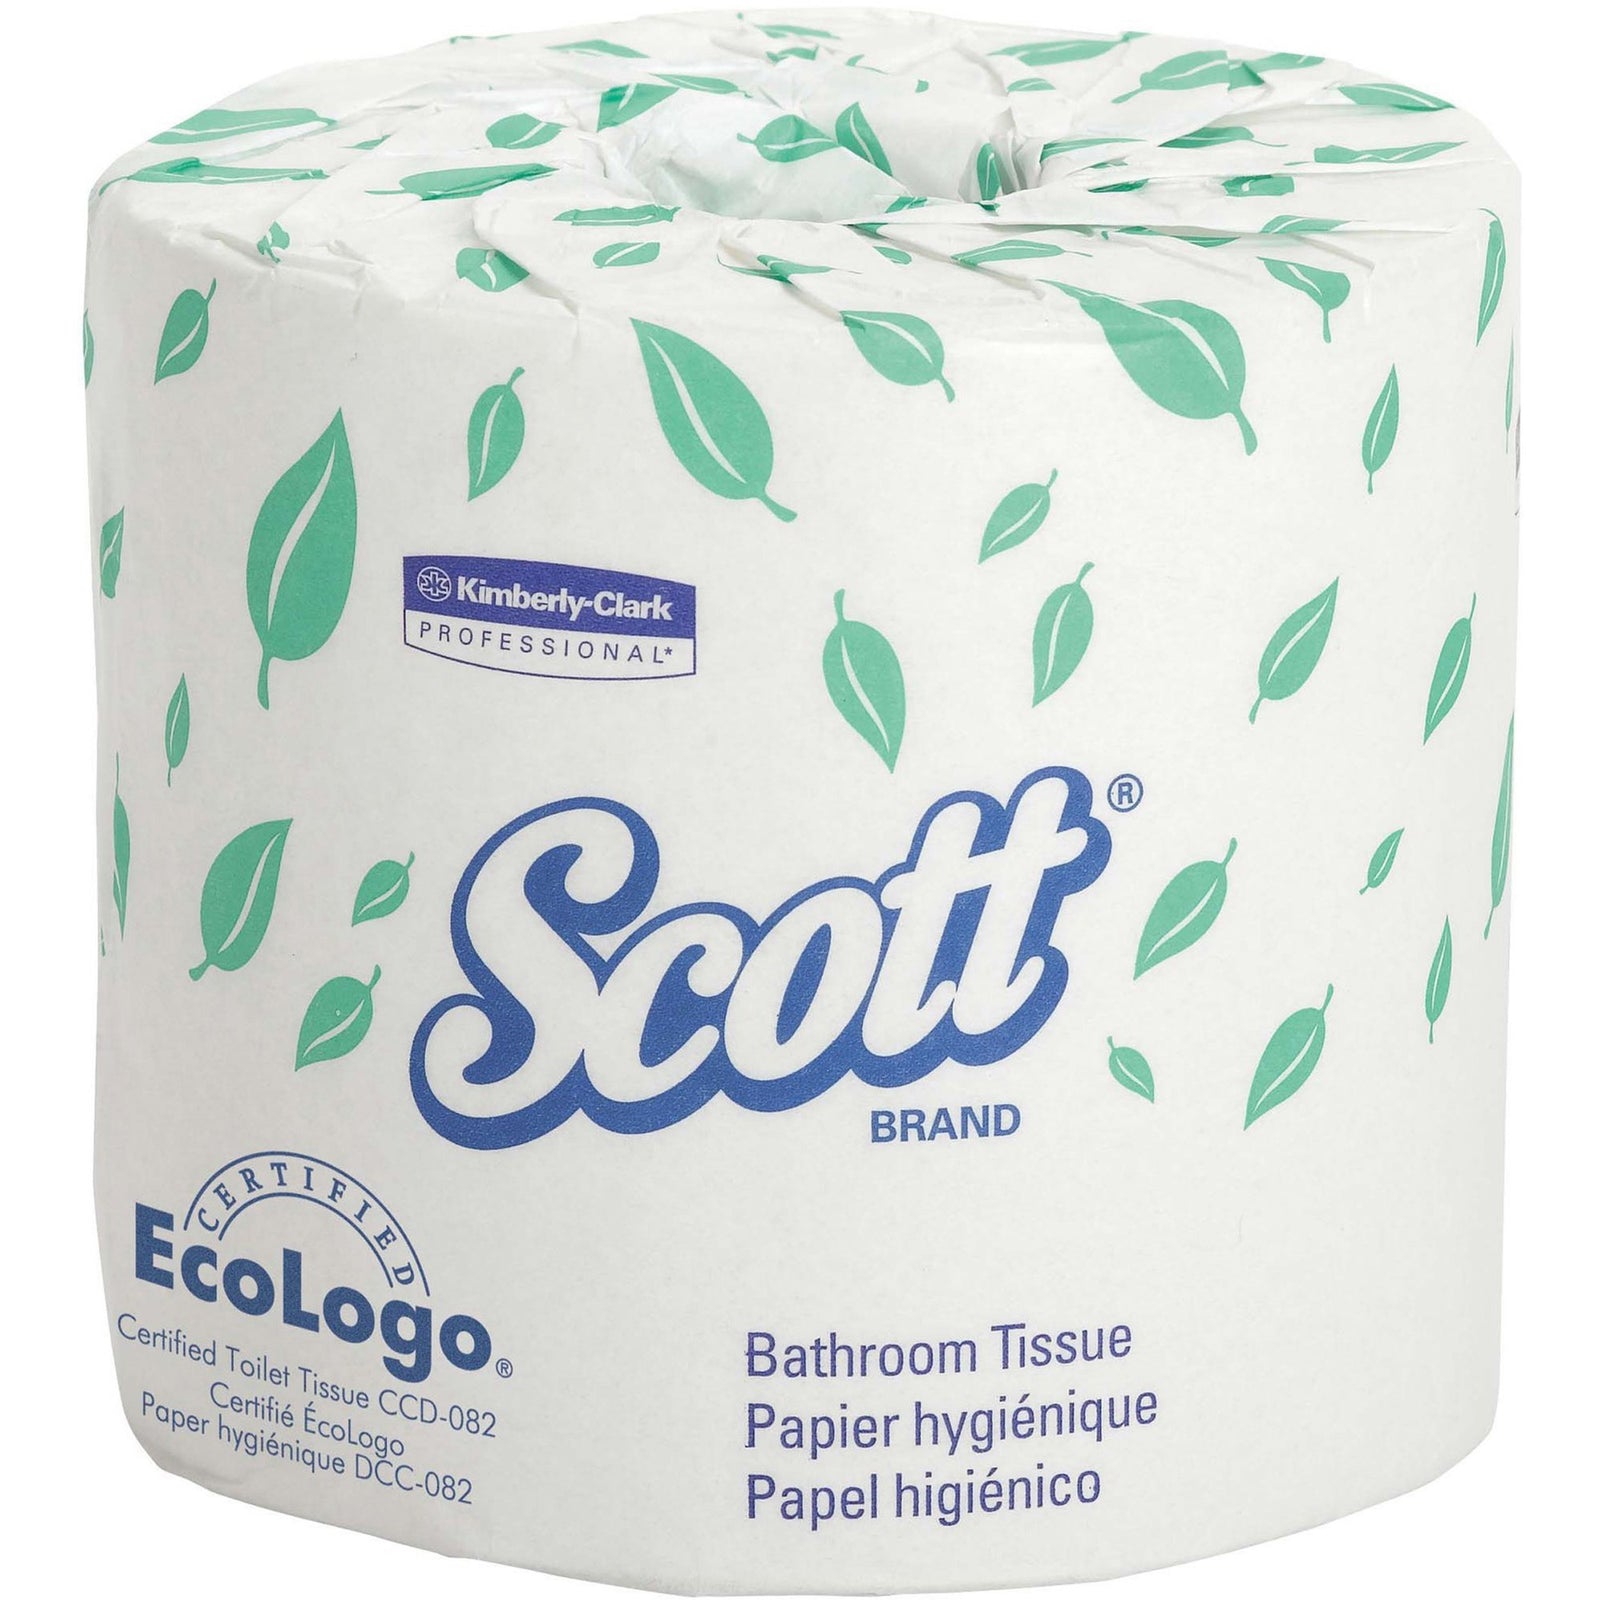 Kleenex® Standard Size Toilet Roll 8477 - 2 Ply Toilet Paper - 9 Packs of 4 Toilet  Rolls x 210 White Toilet Tissue Sheets (36 Rolls / 7,560 Sheets Total)